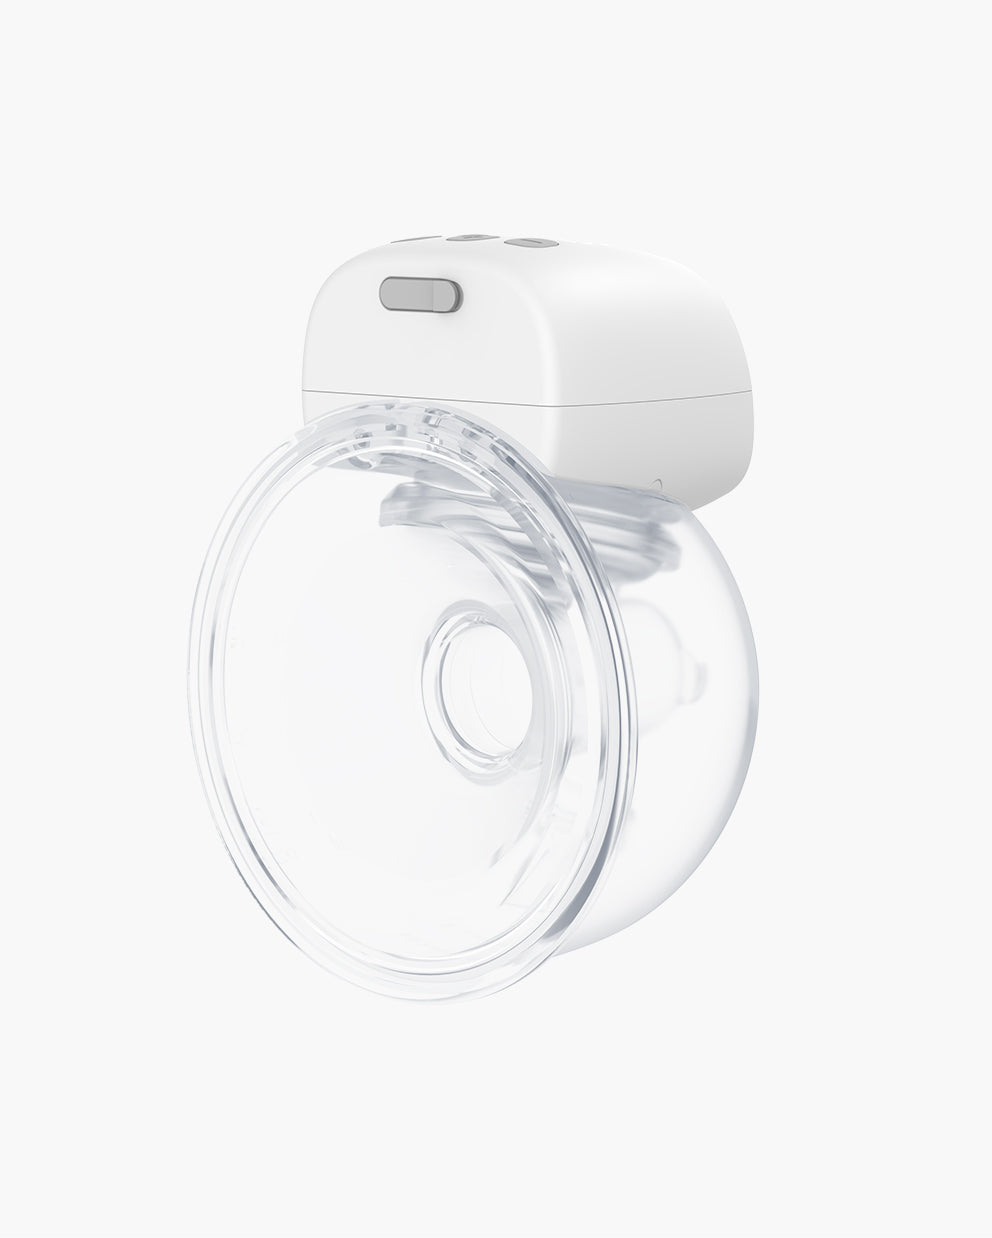 Momcozy S9 Pro Breast Pump Kshs 23,000 Less Time, More Milk - Momcozy S9  Pro wearable breast pump with 2 modes & 9 levels. Imitating the…